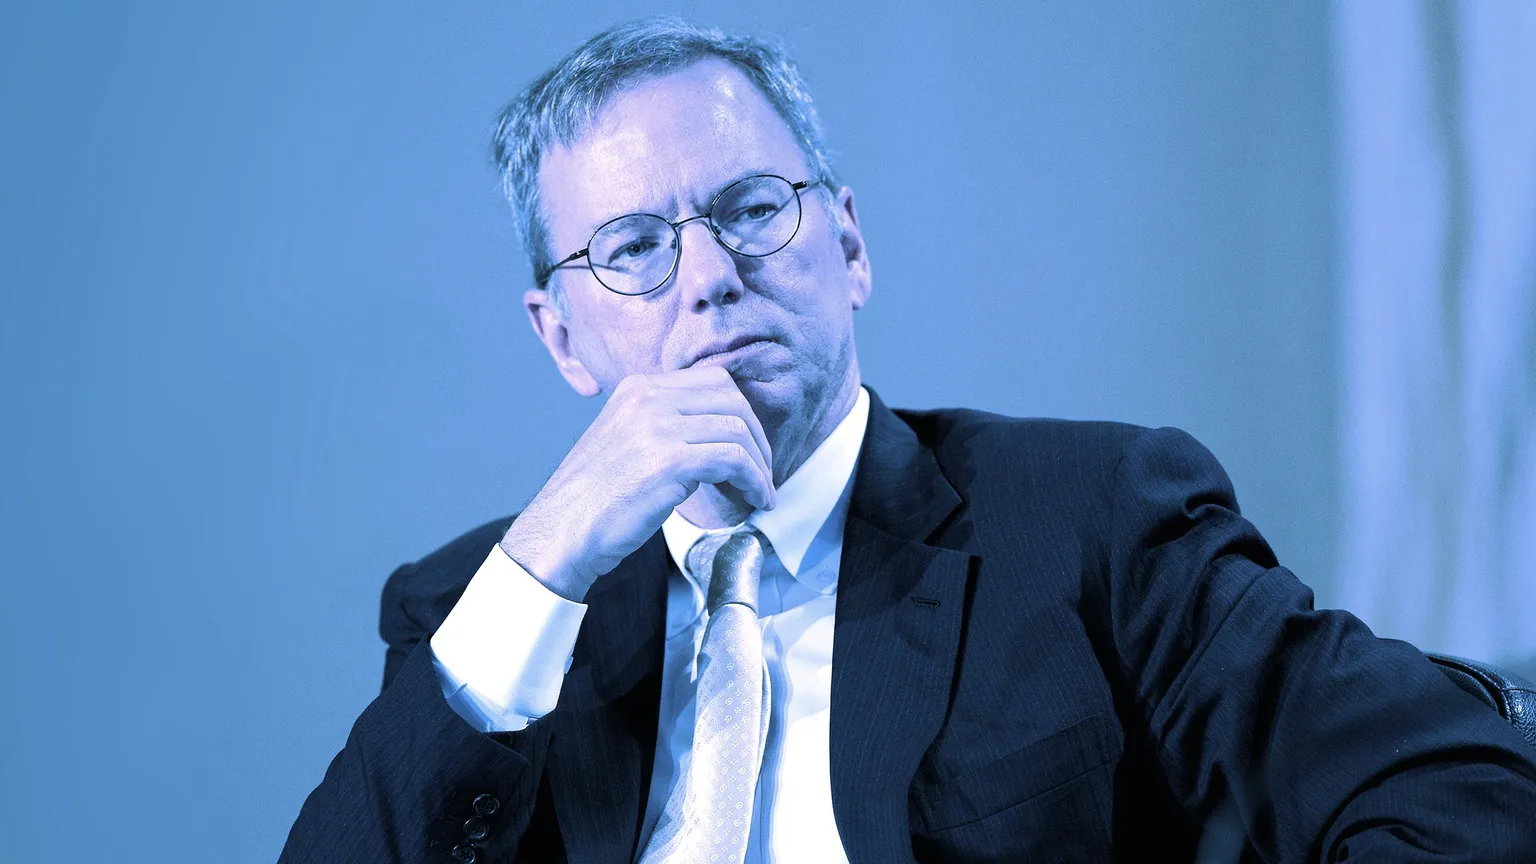 Then Google CEO Eric Schmidt during press conference about news technologies at the summit G8/G20 in Deauville, France on May 26, 2011.